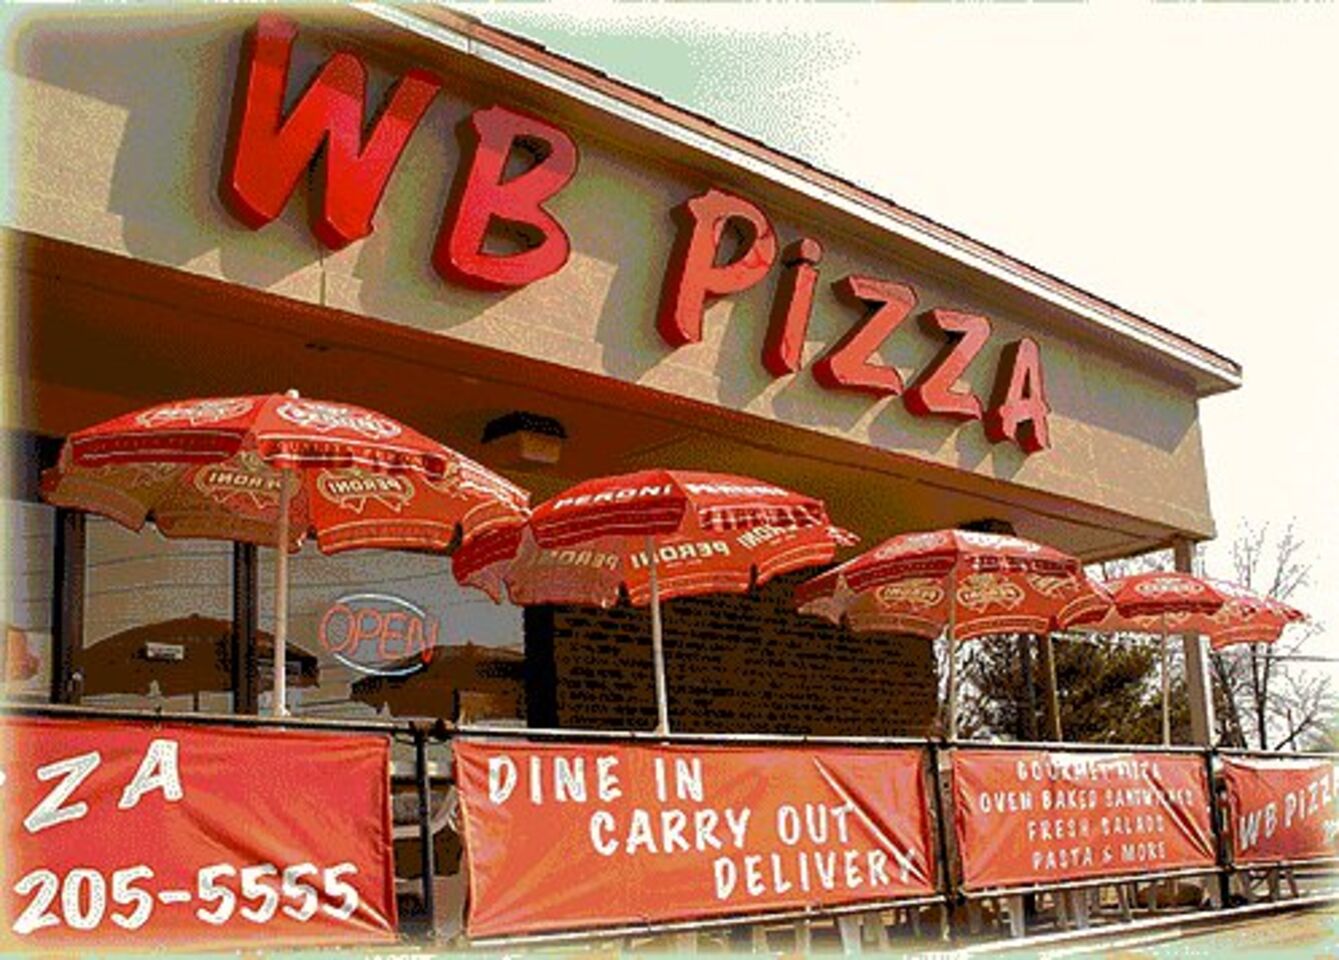 A photo of WB Pizza